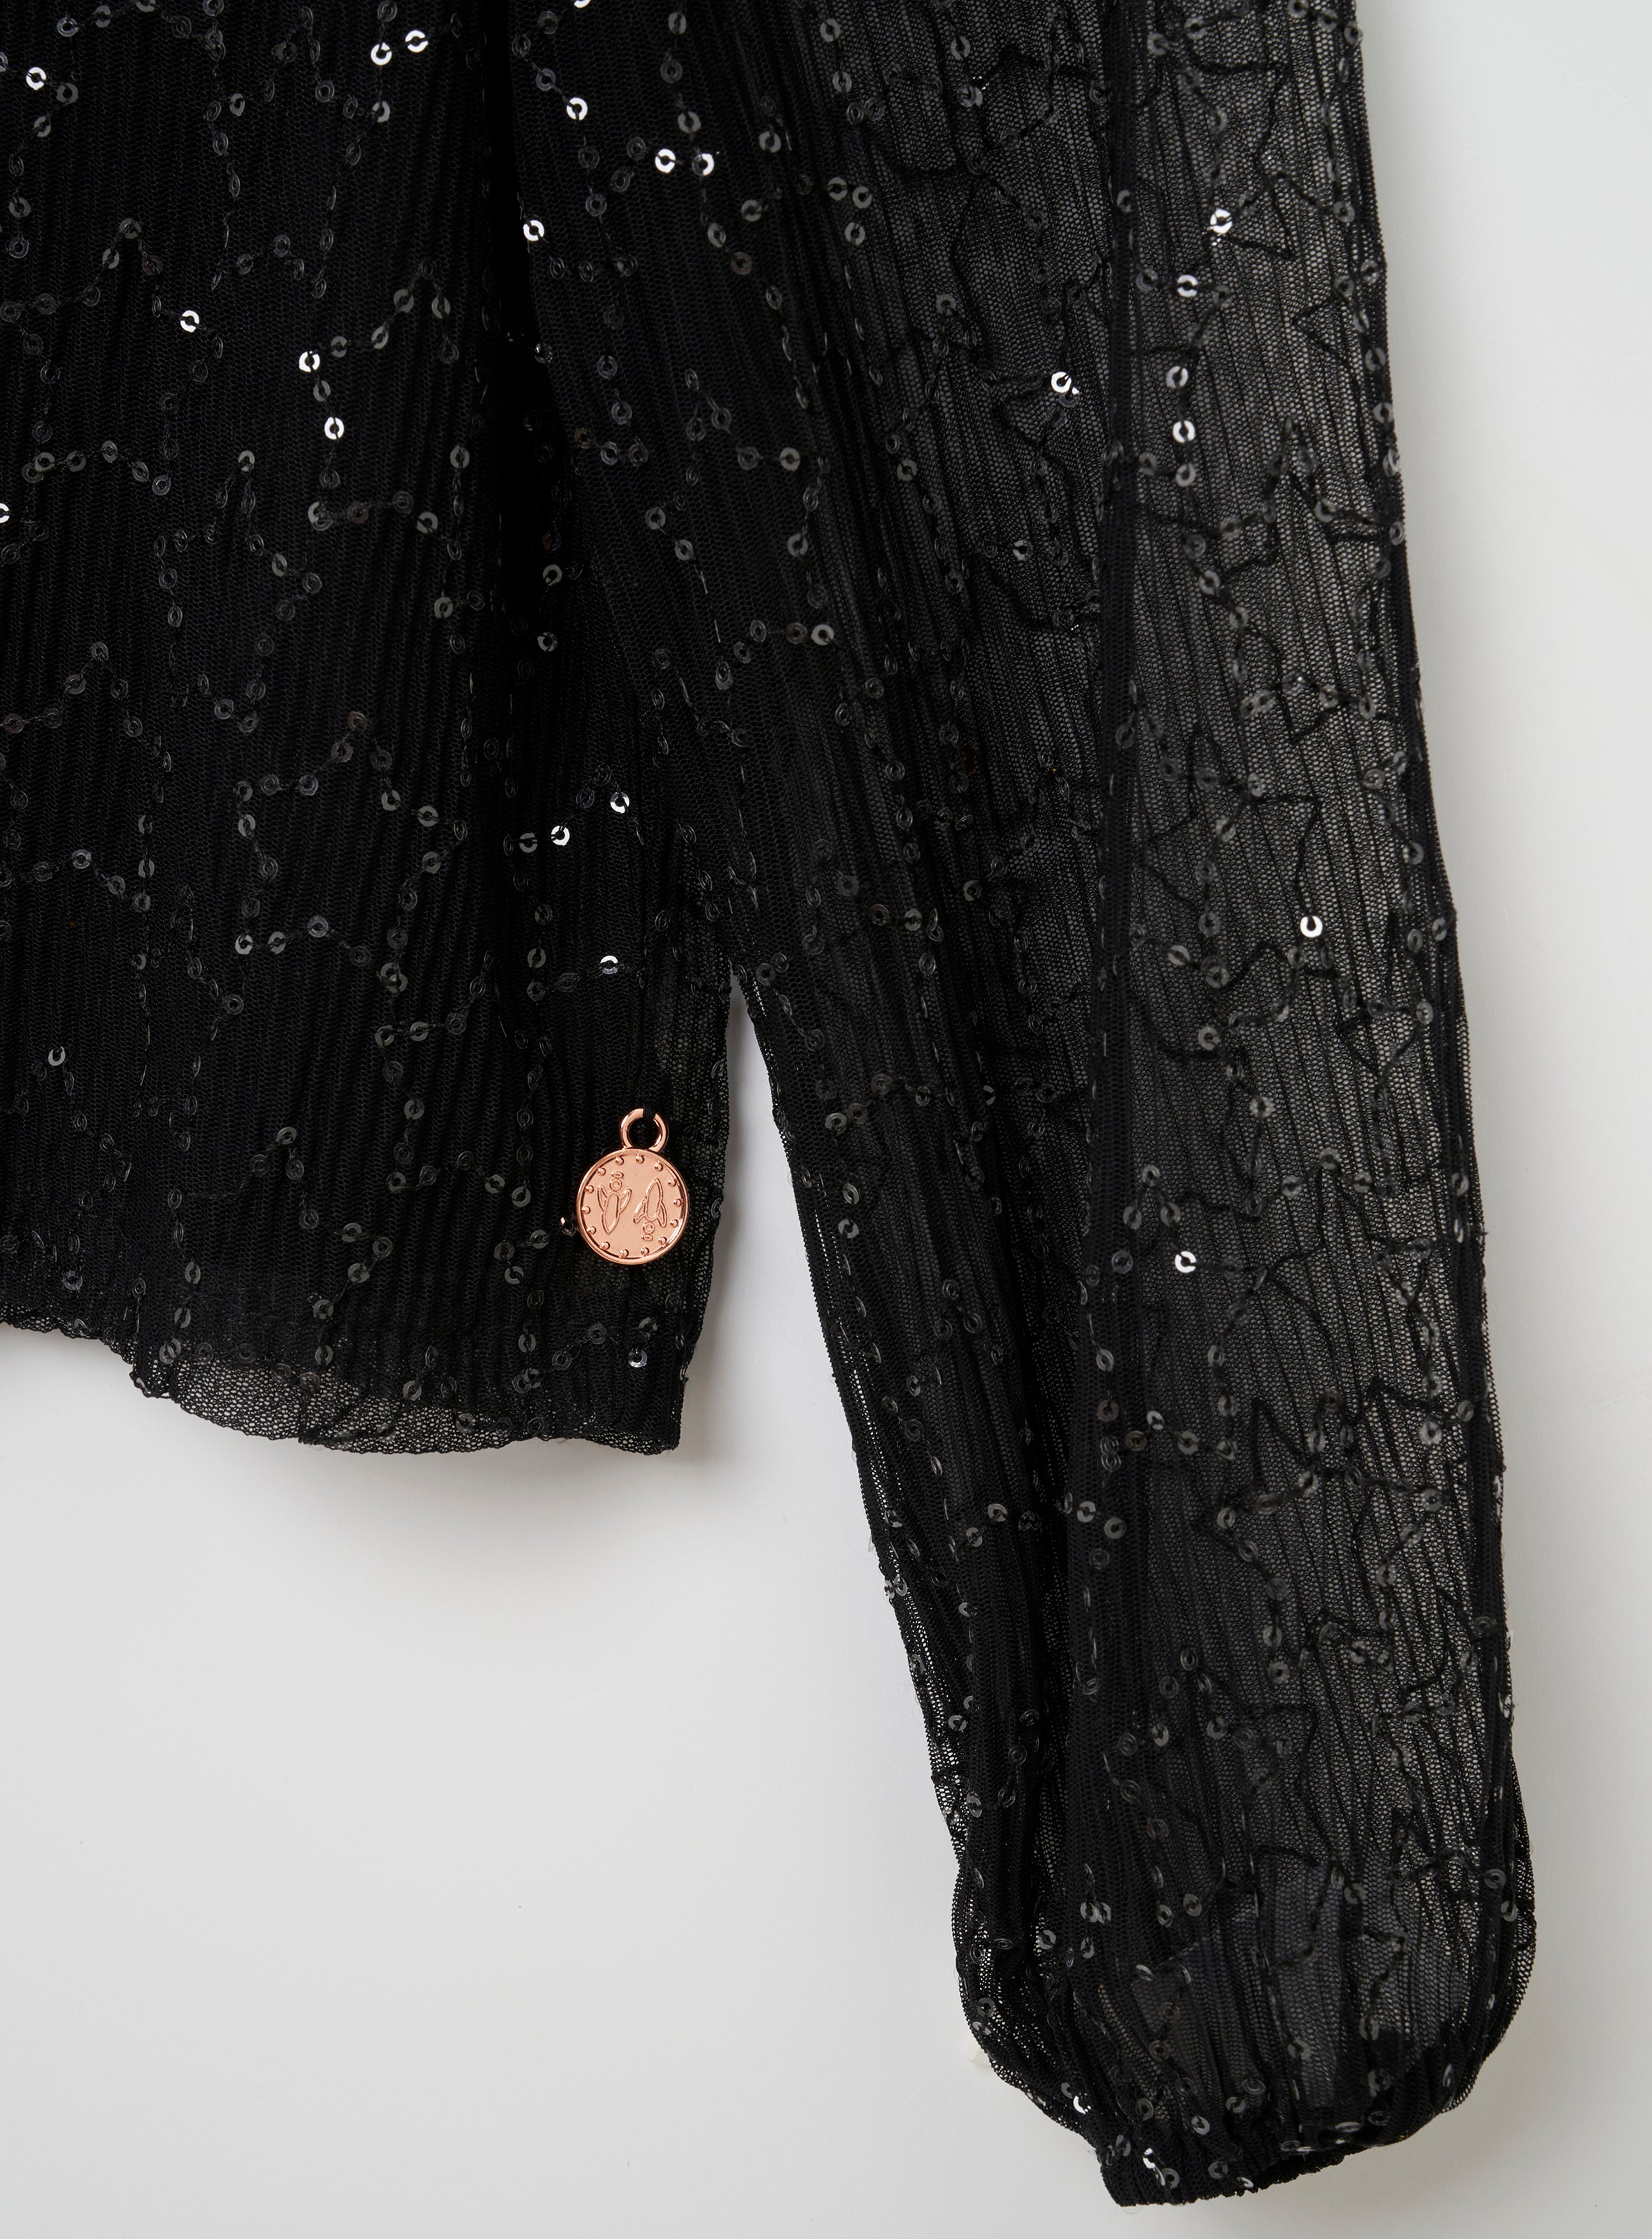 Girls Star Sequin Embellished Black Top with Cuff Sleeves